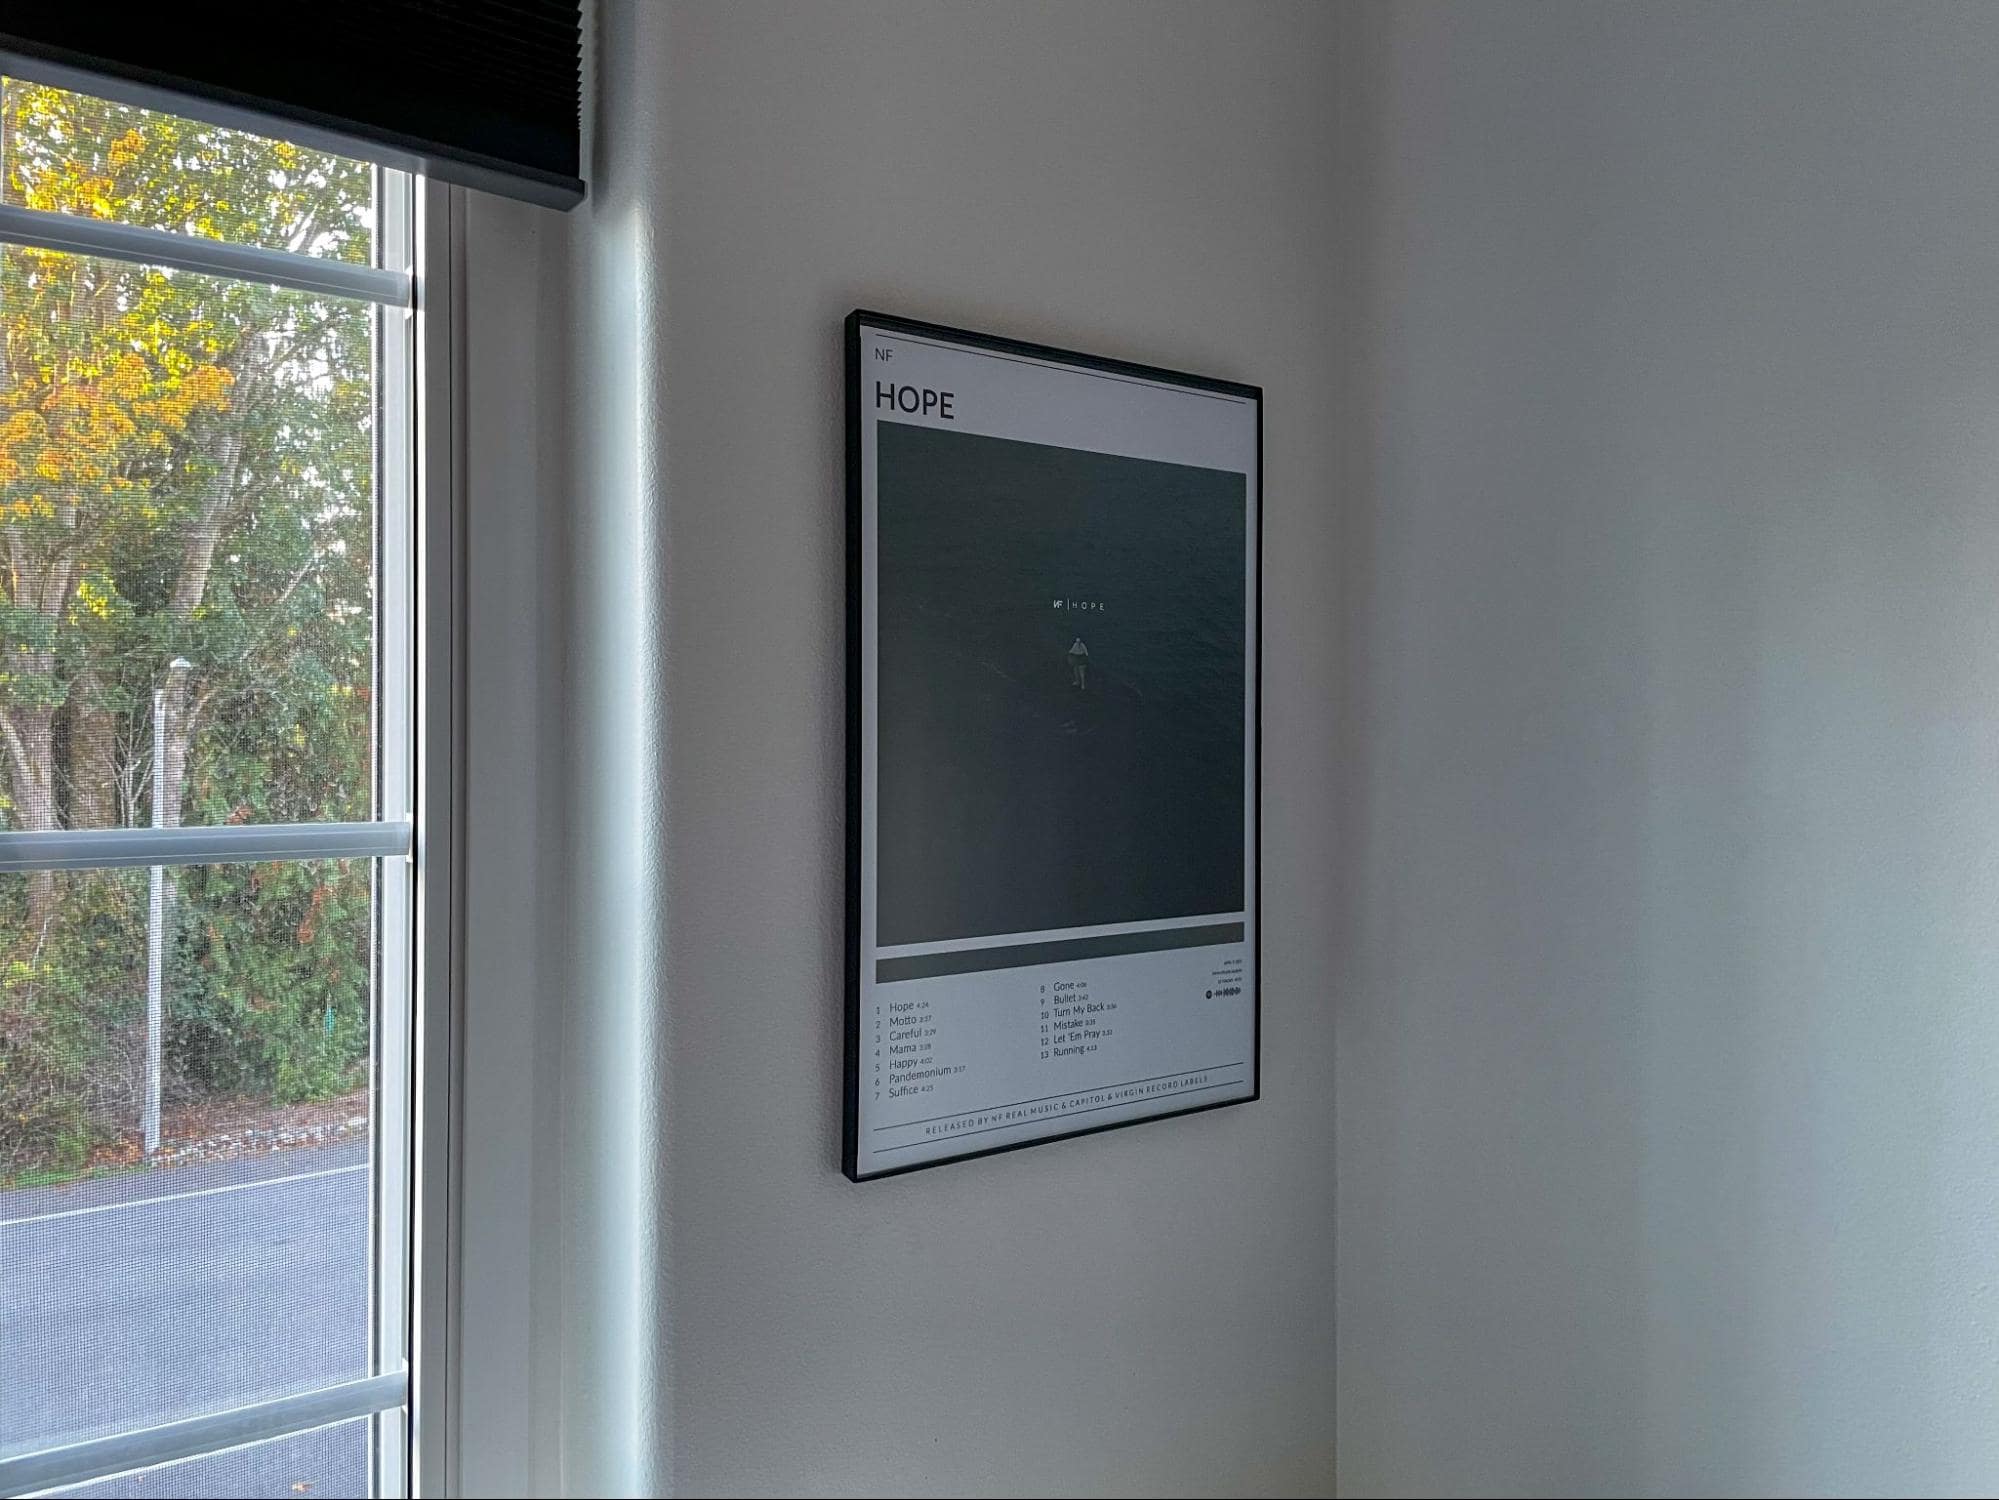 A framed poster titled “HOPE” on a light grey wall next to a window with a view of autumn trees